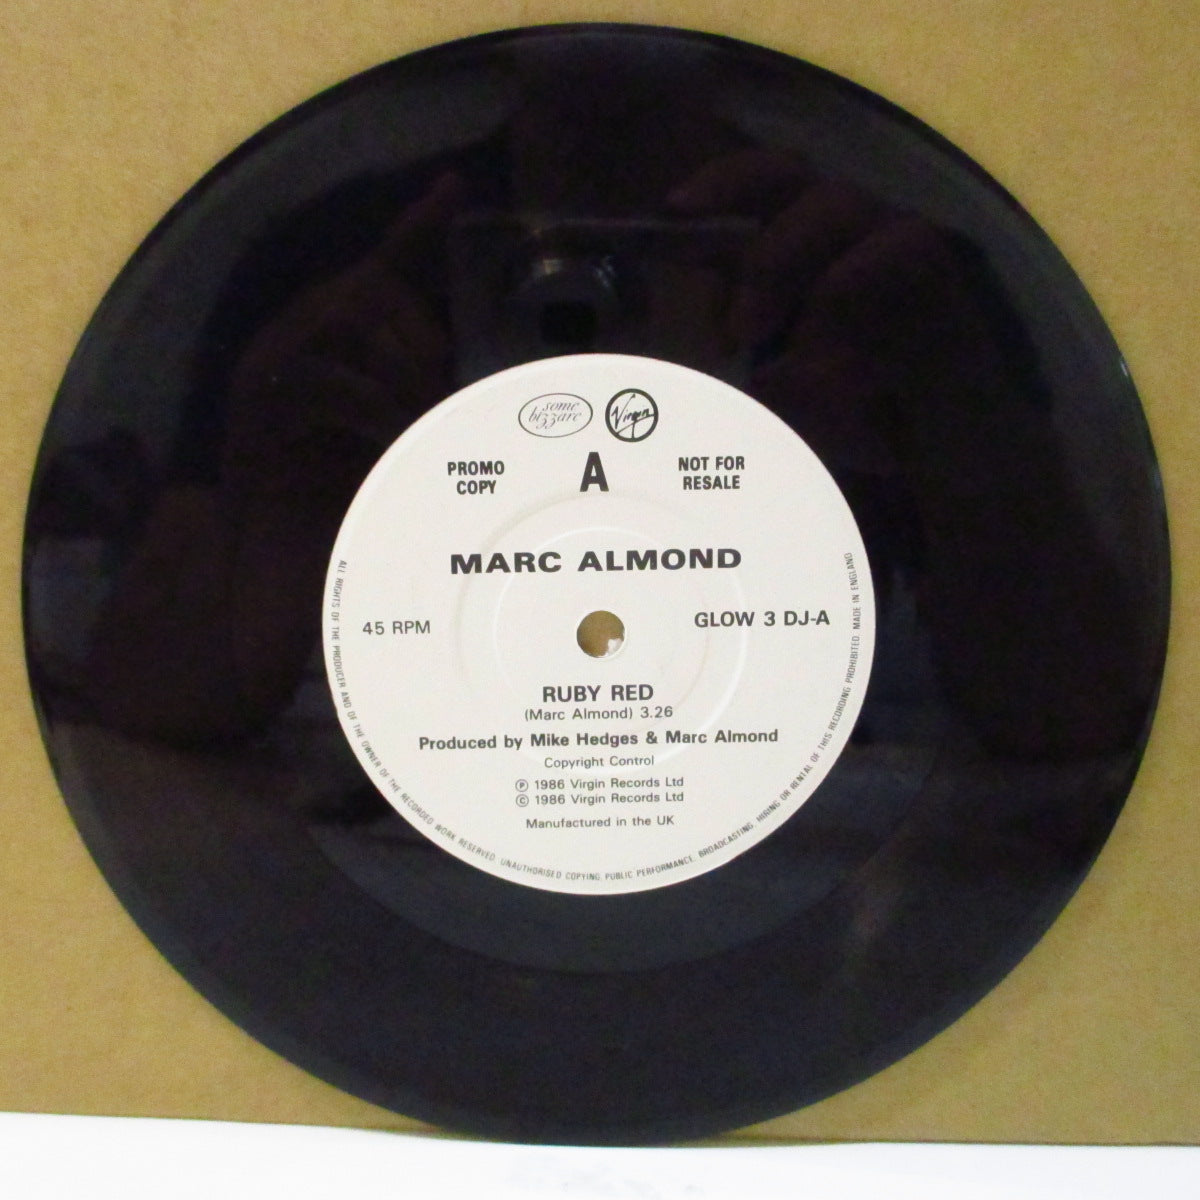 MARC ALMOND WITH THE WILLING SINNERS (マーク・アーモンド) - Ruby Red (UK Promo.7